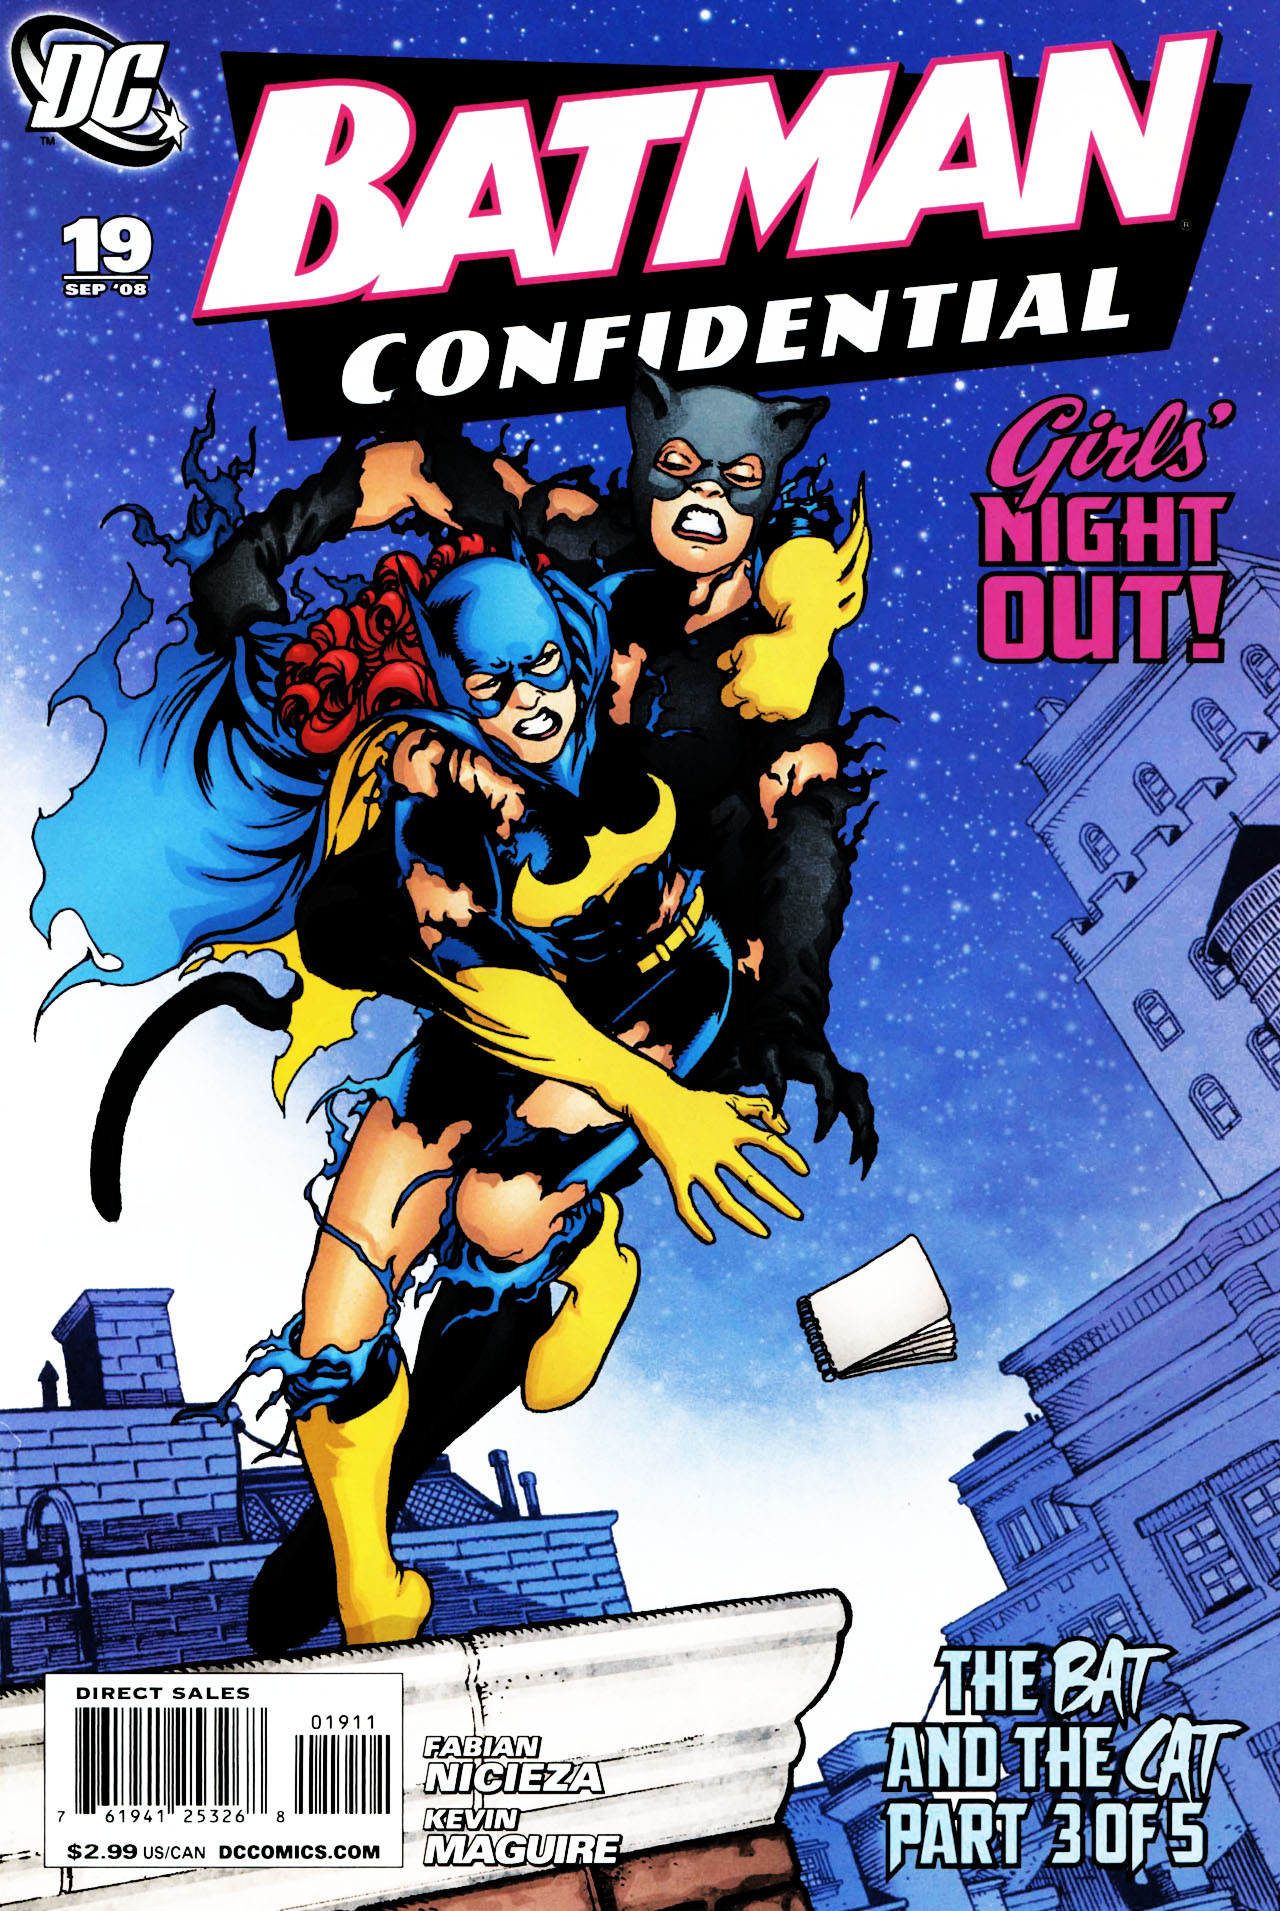 Batman Confidential Issue 19 | Read Batman Confidential Issue 19 comic  online in high quality. Read Full Comic online for free - Read comics  online in high quality .|